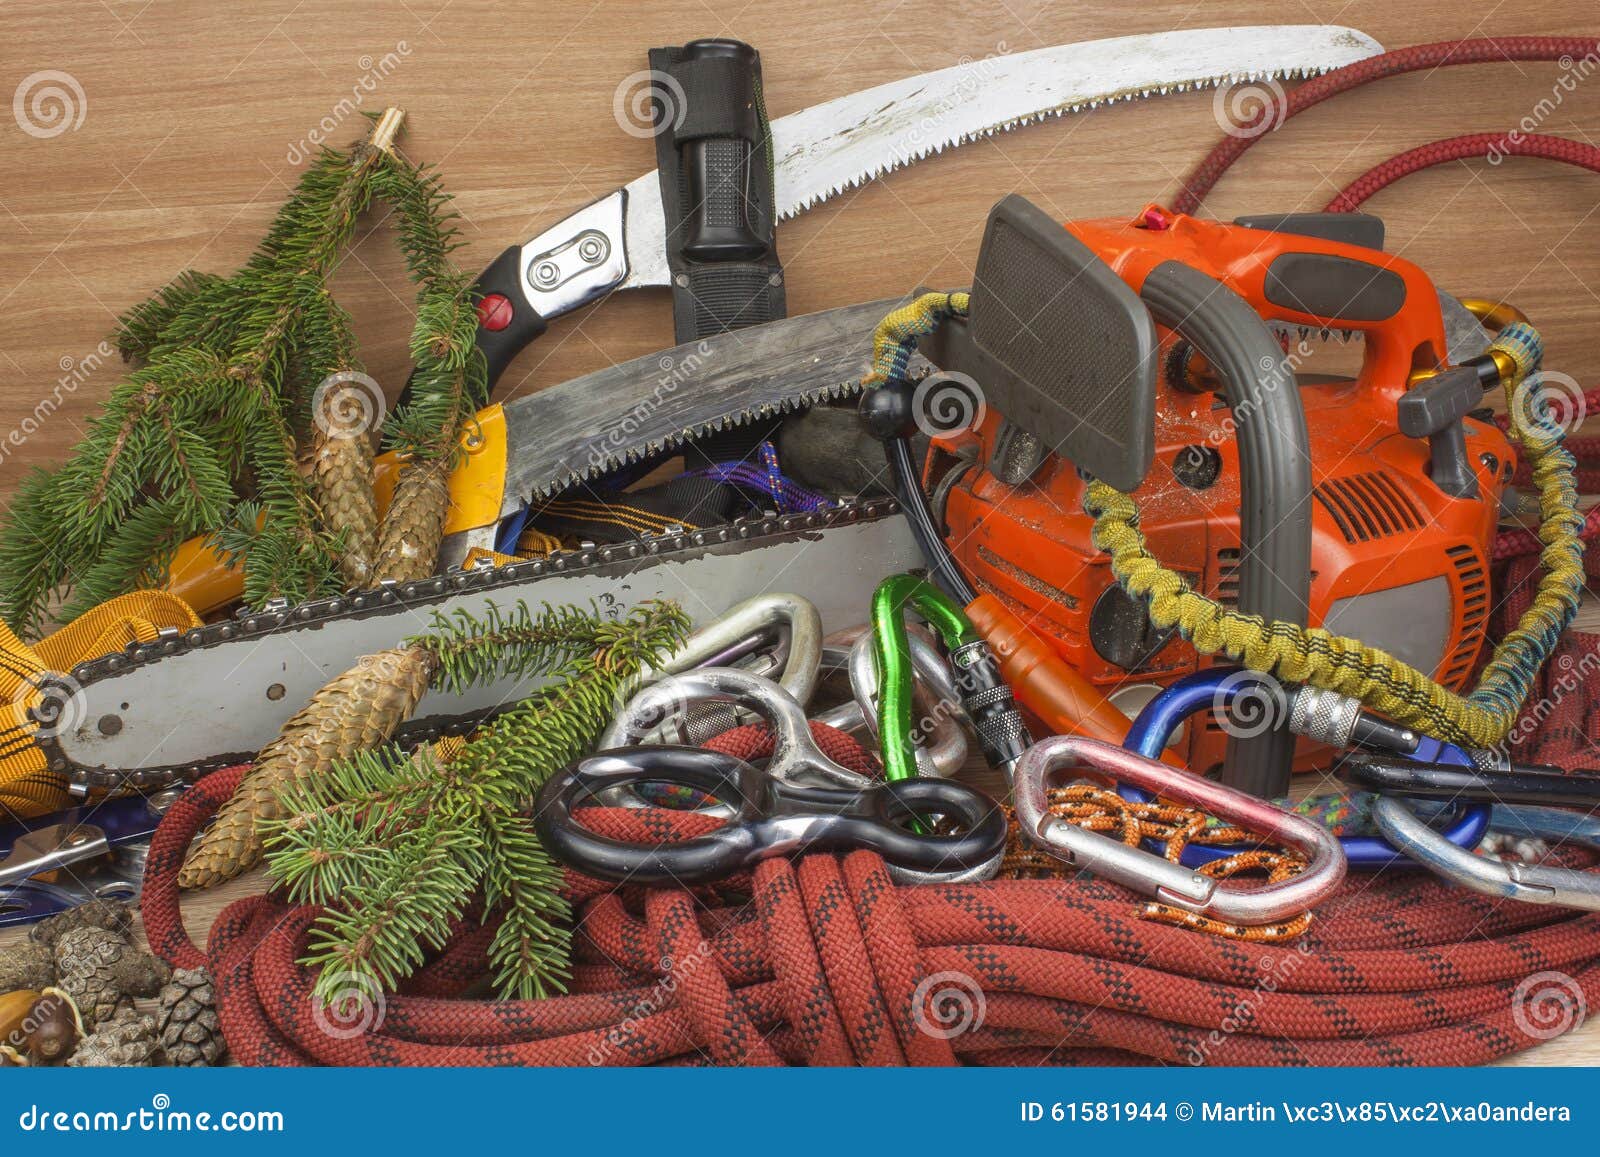 Tools for Trimming Trees, Utility Arborists. Chainsaw, Rope and Carabiners  To Work Lumberjack Stock Photo - Image of forestry, arborist: 61581944